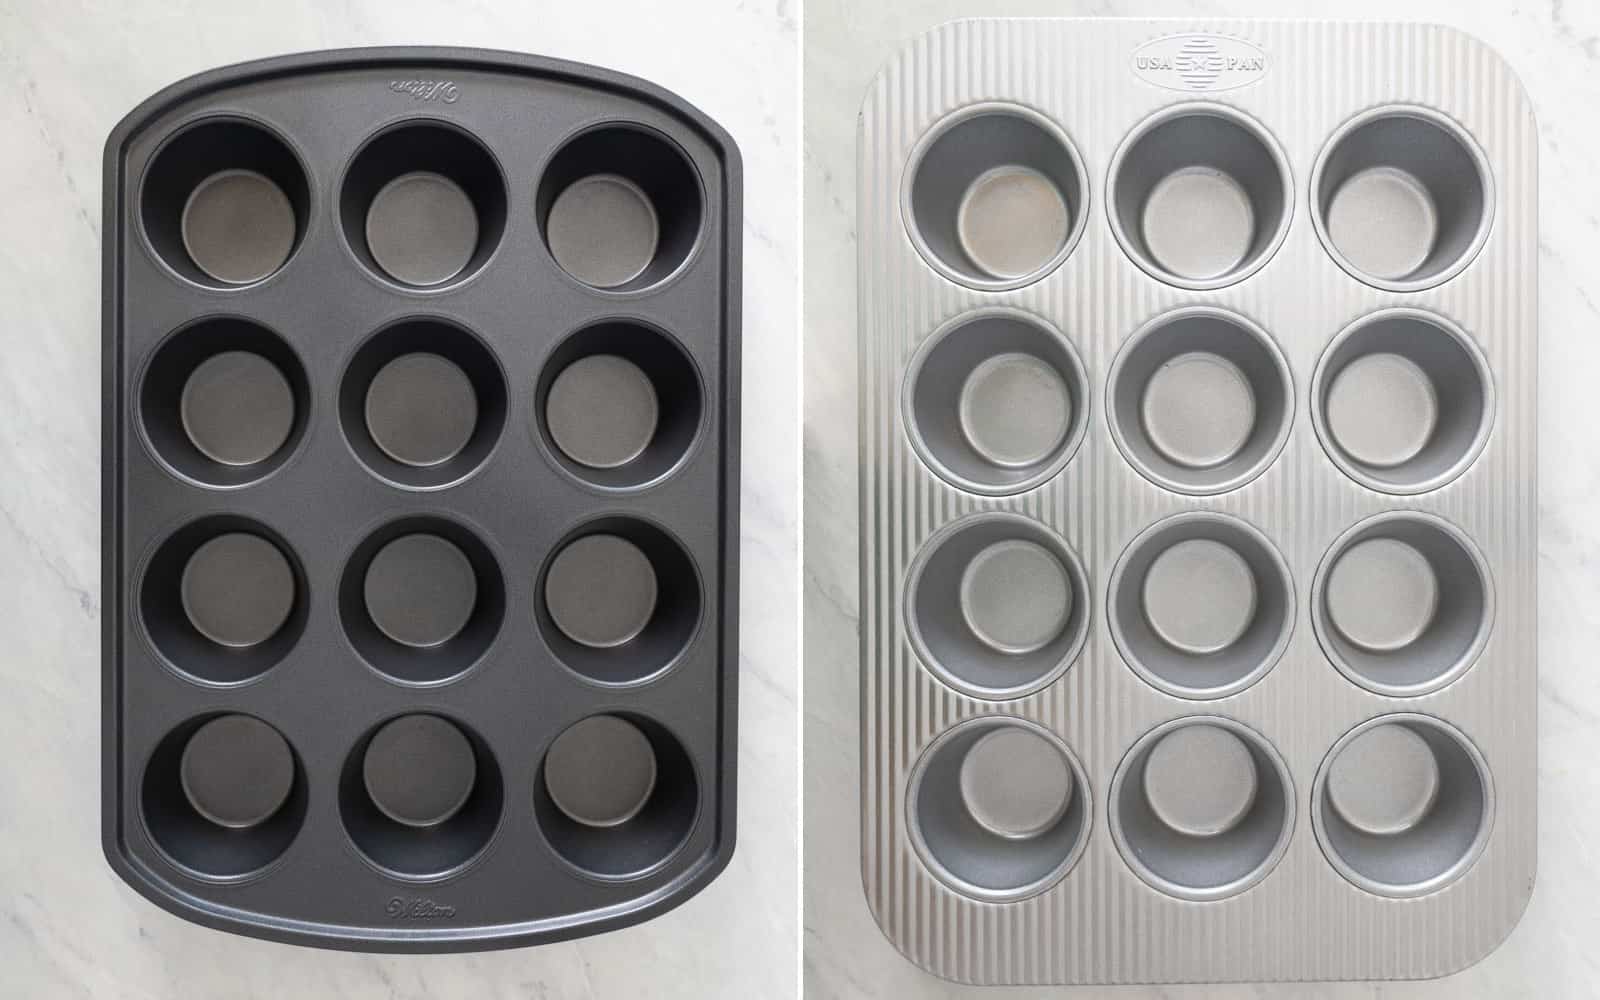 Dark and light colored muffin pans